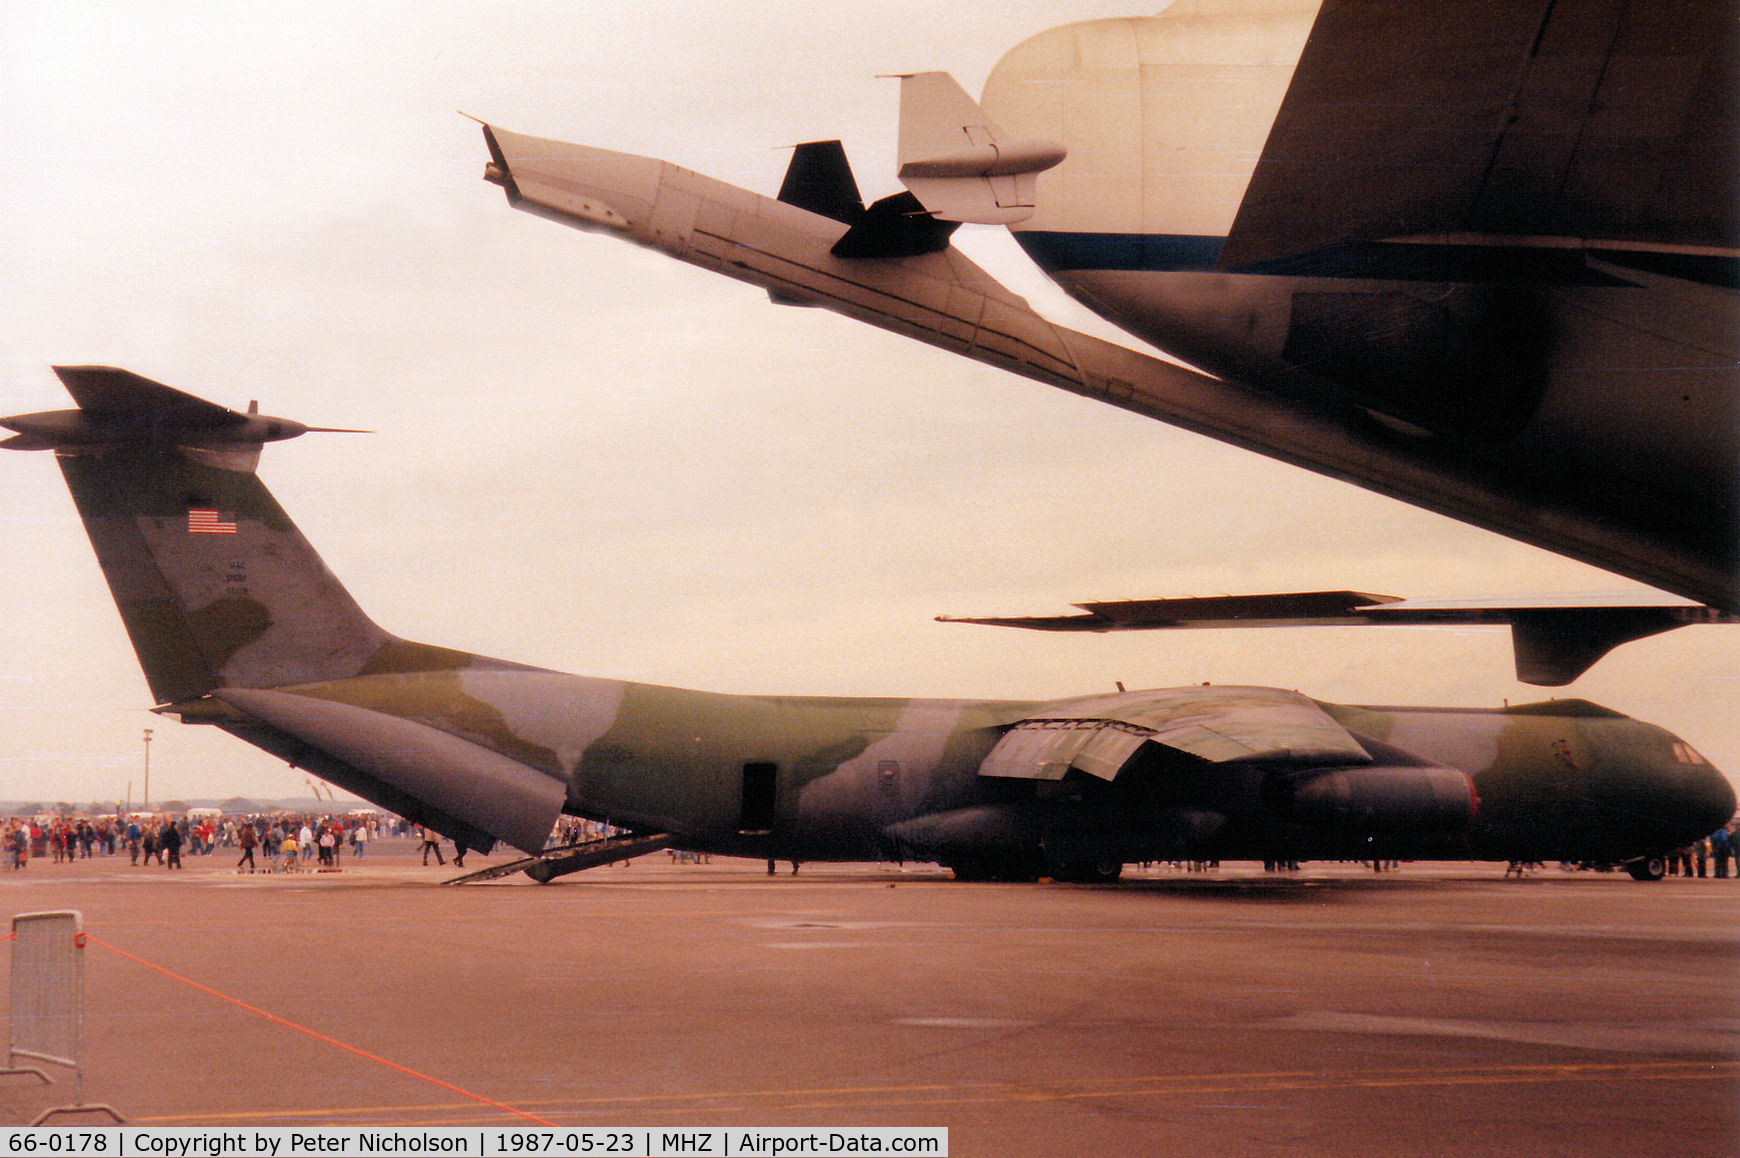 66-0178, 1966 Lockheed C-141B Starlifter C/N 300-6204, C-141B Starlifter of 437th Military Airlift Wing at Charleston AFB on display at the 1987 RAF Mildenhall Air Fete.